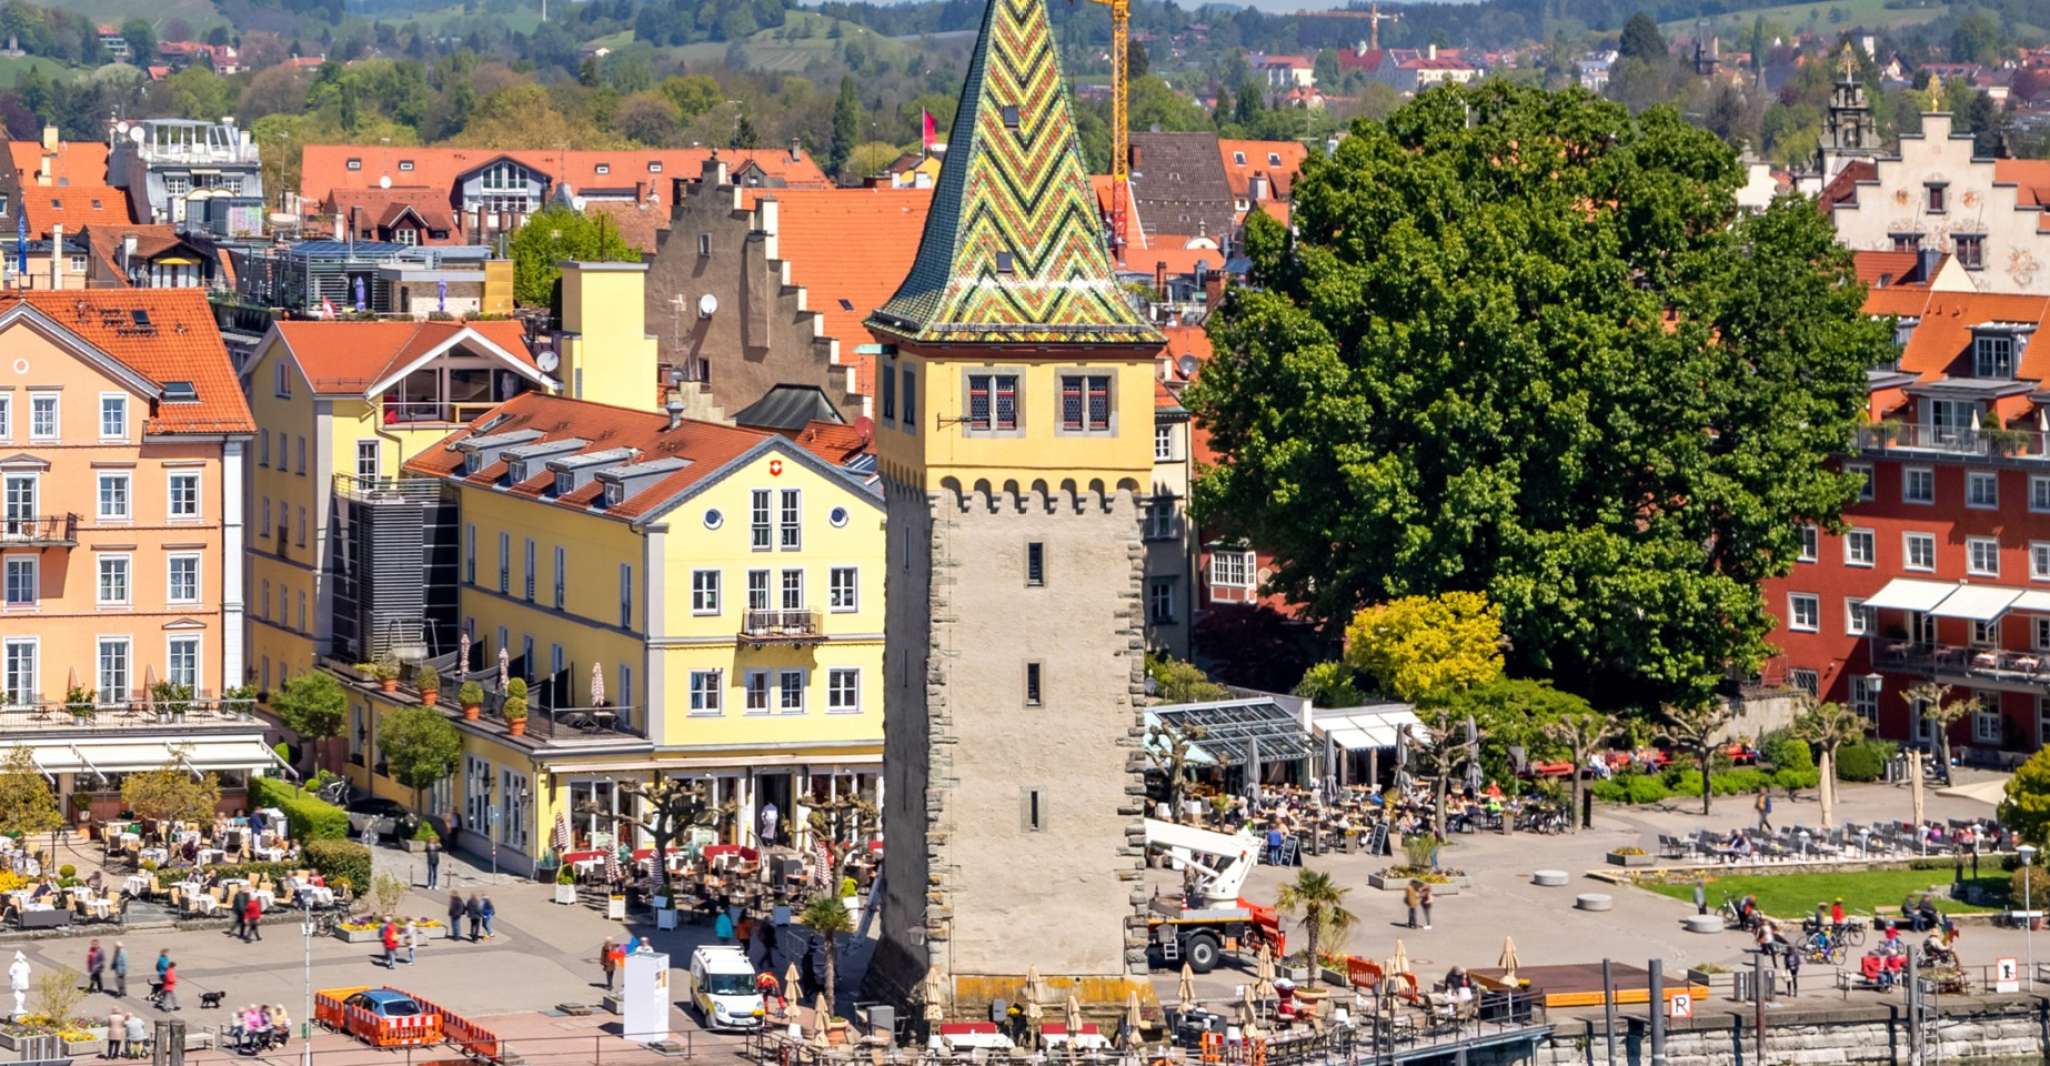 Lindau Scavenger Hunt and Sights Self-Guided Tour - Housity